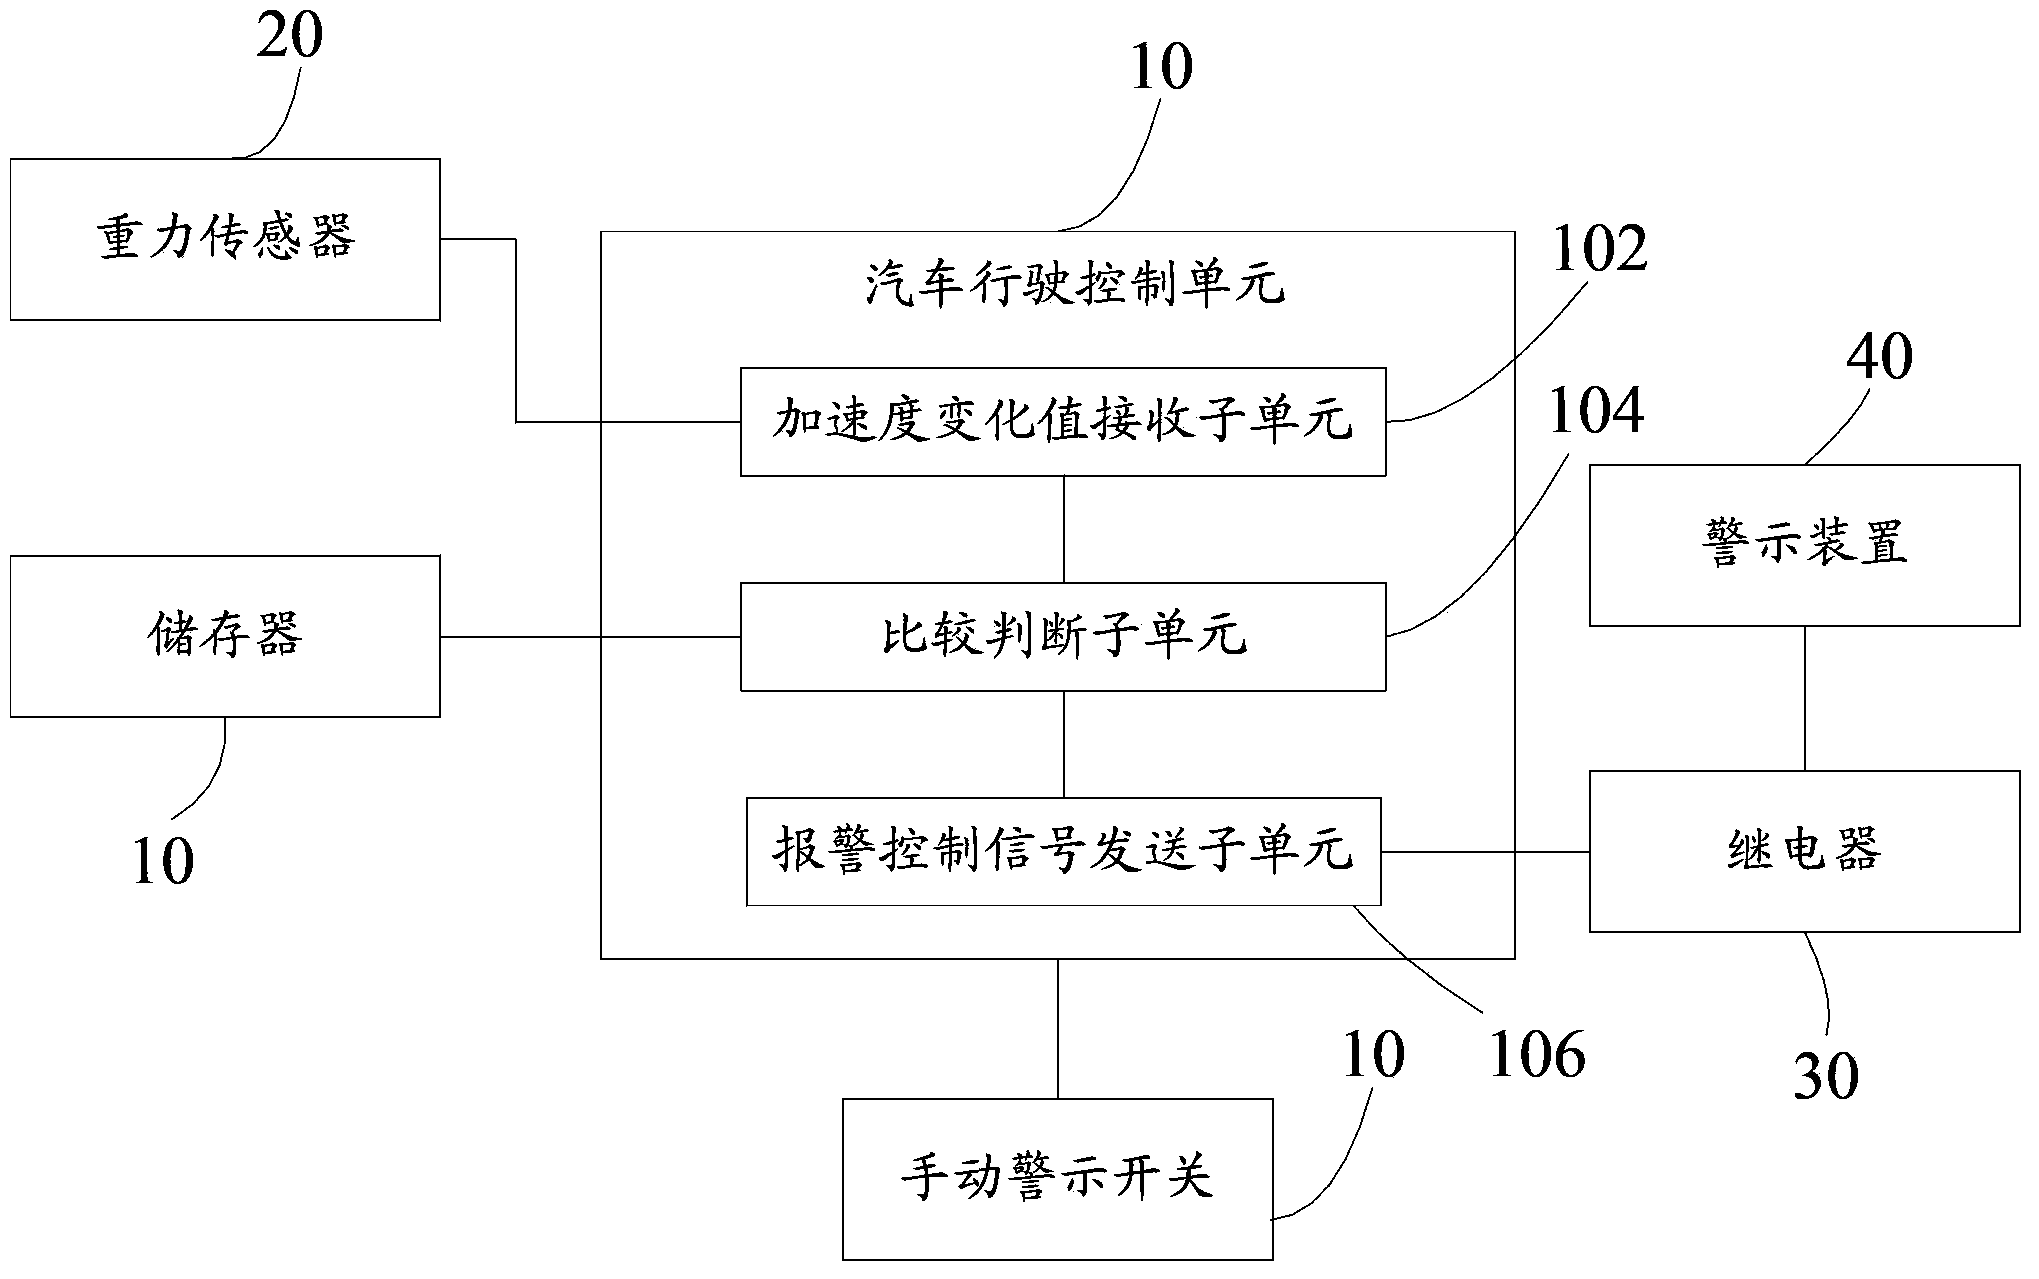 Automobile emergency automatic alarm system and method